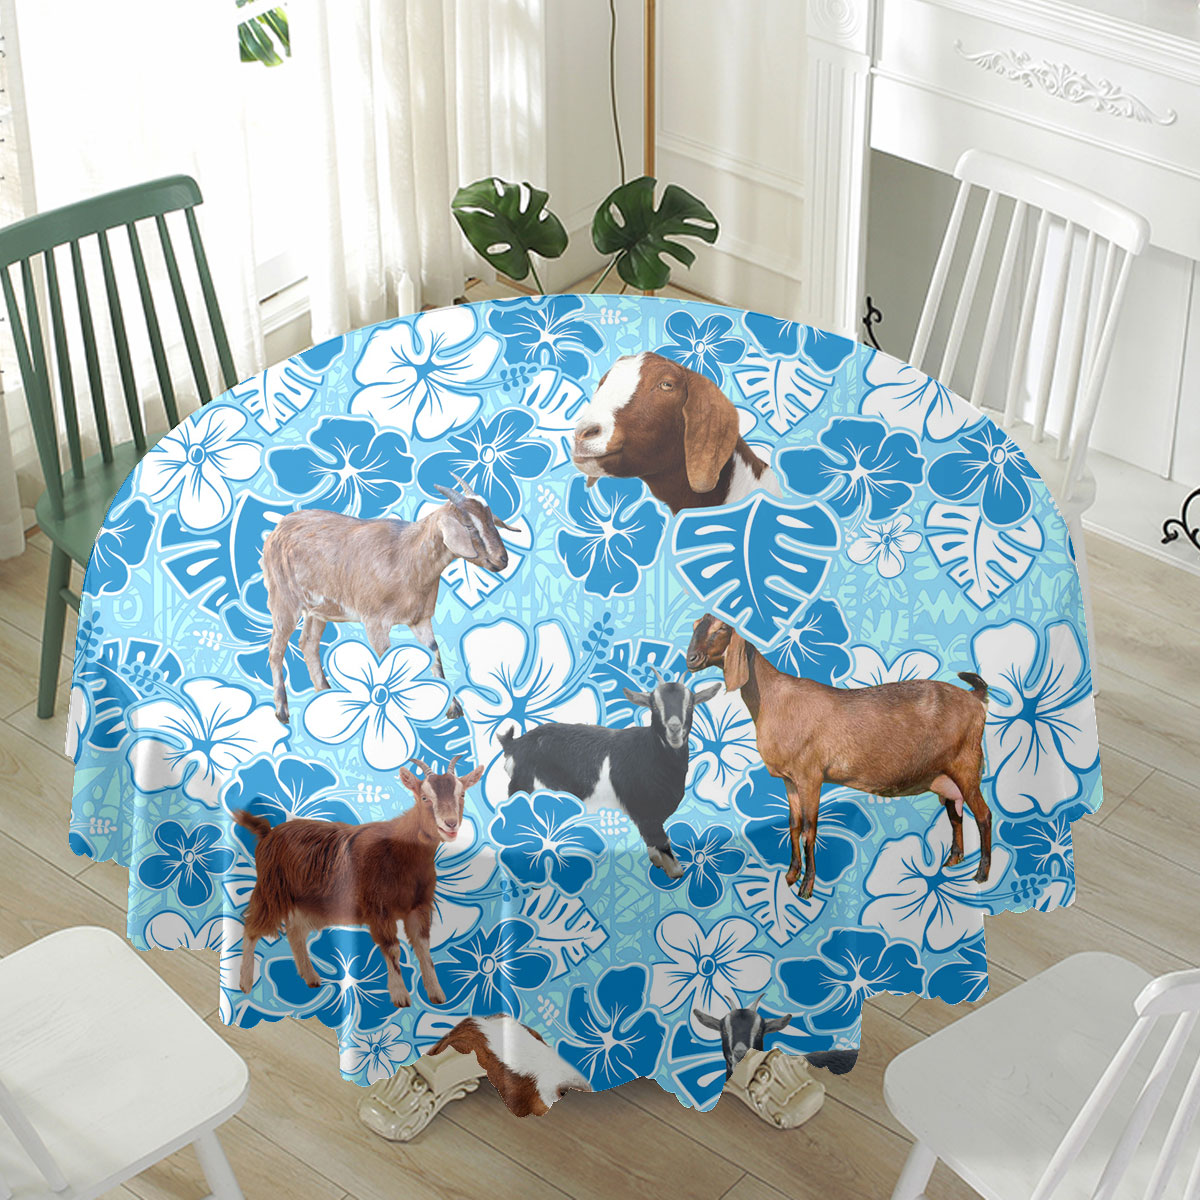 Nubian Goat Blue Floral Waterproof Tablecloth